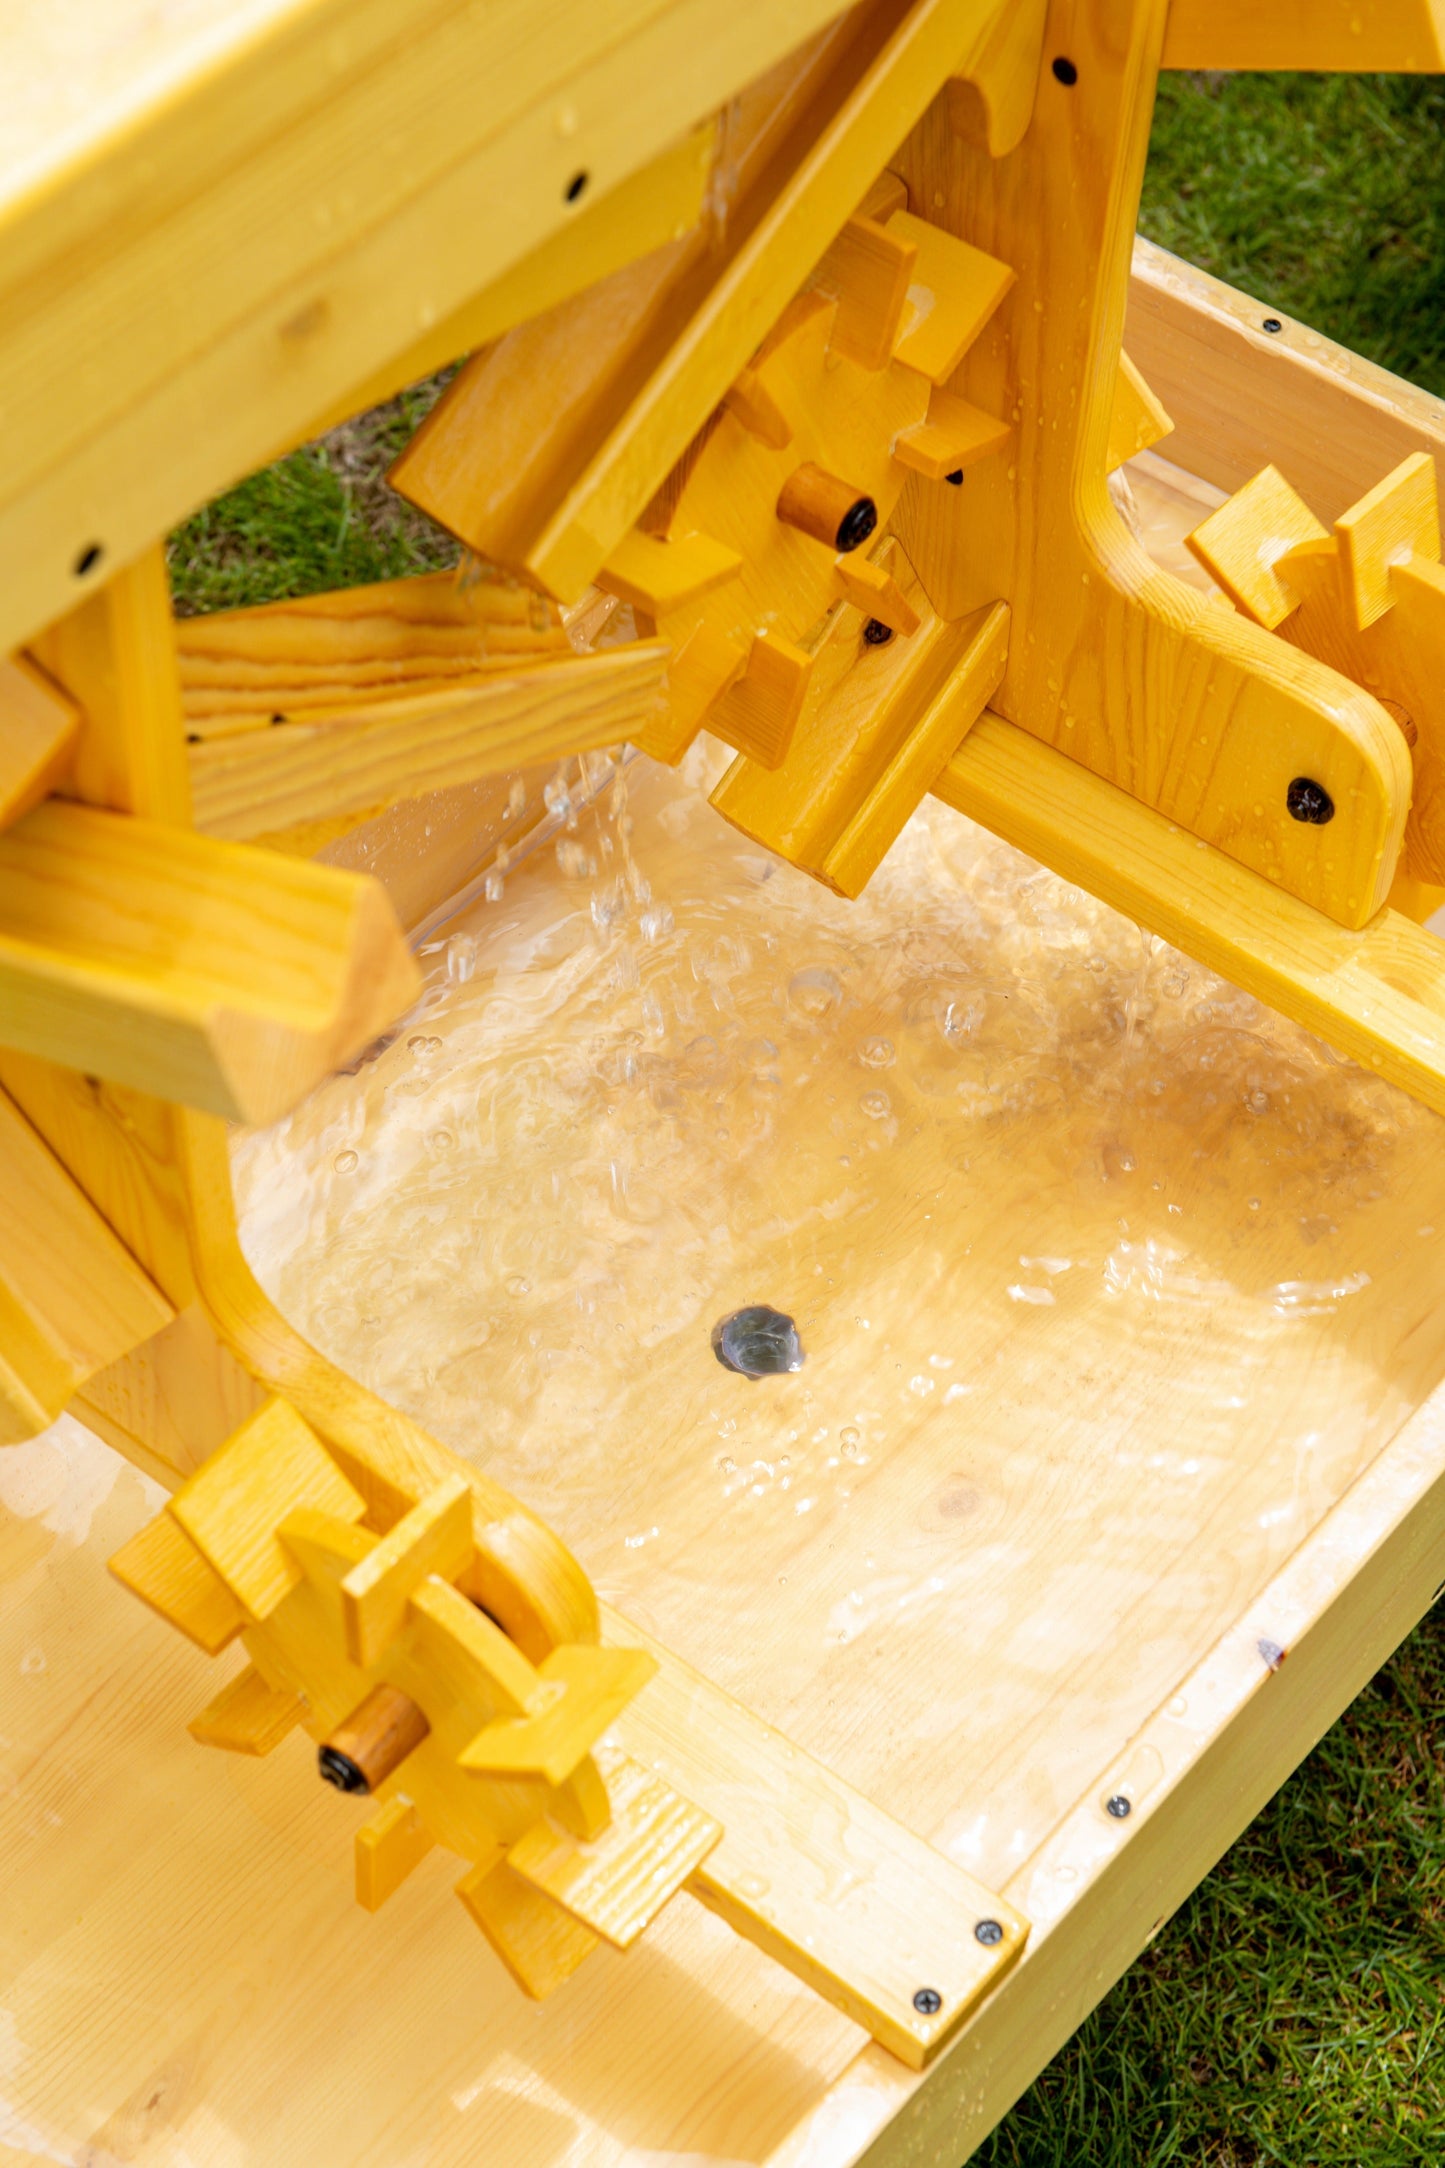 Outdoor Wooden Water Table For Kids, Toddlers by Avenlur